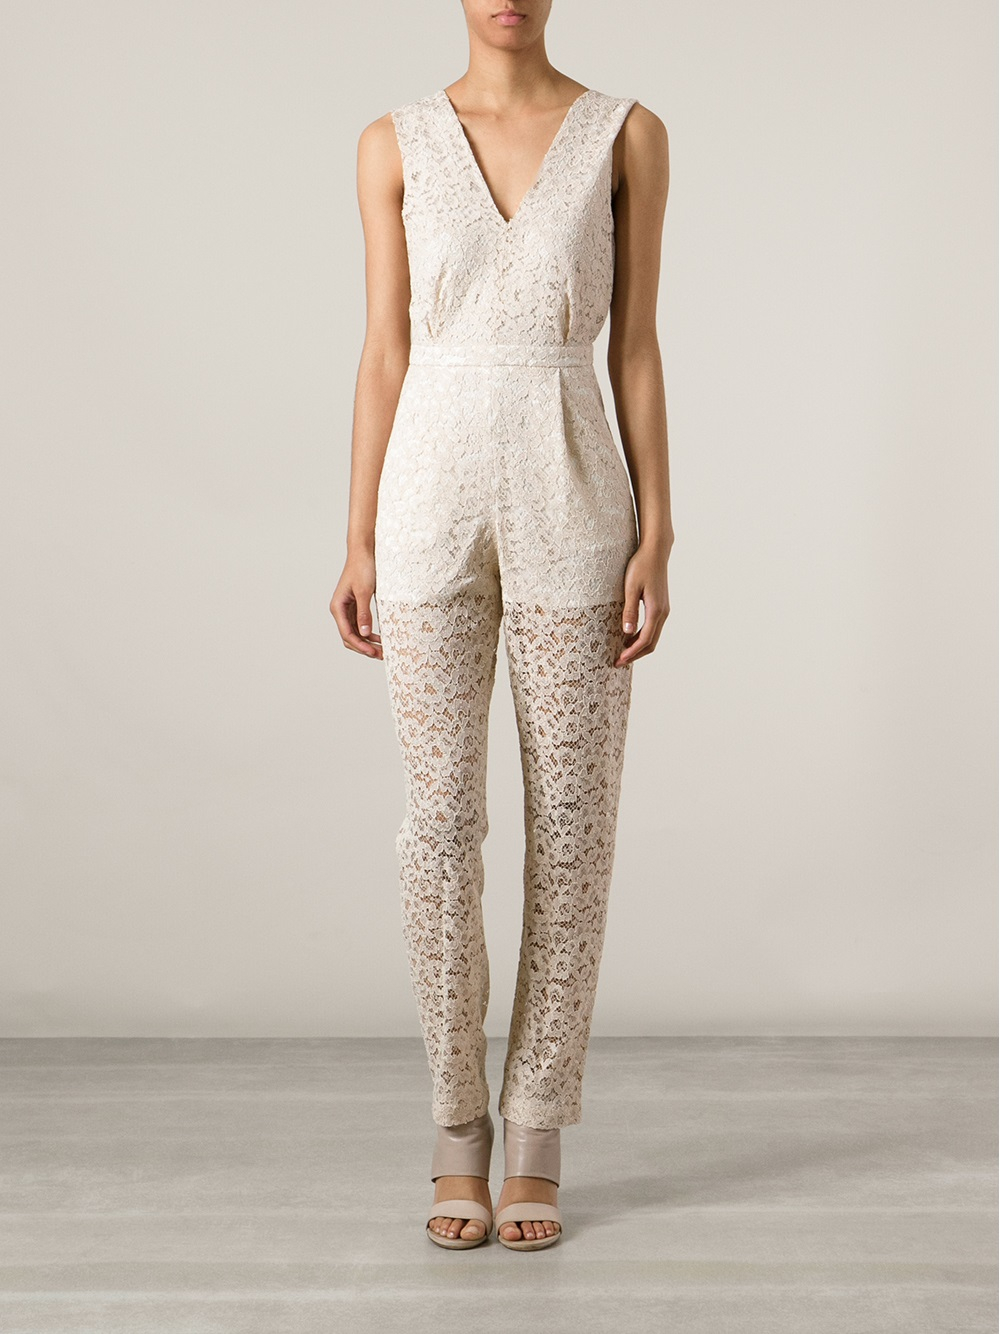 Lyst - Msgm Floral Lace Jumpsuit in White